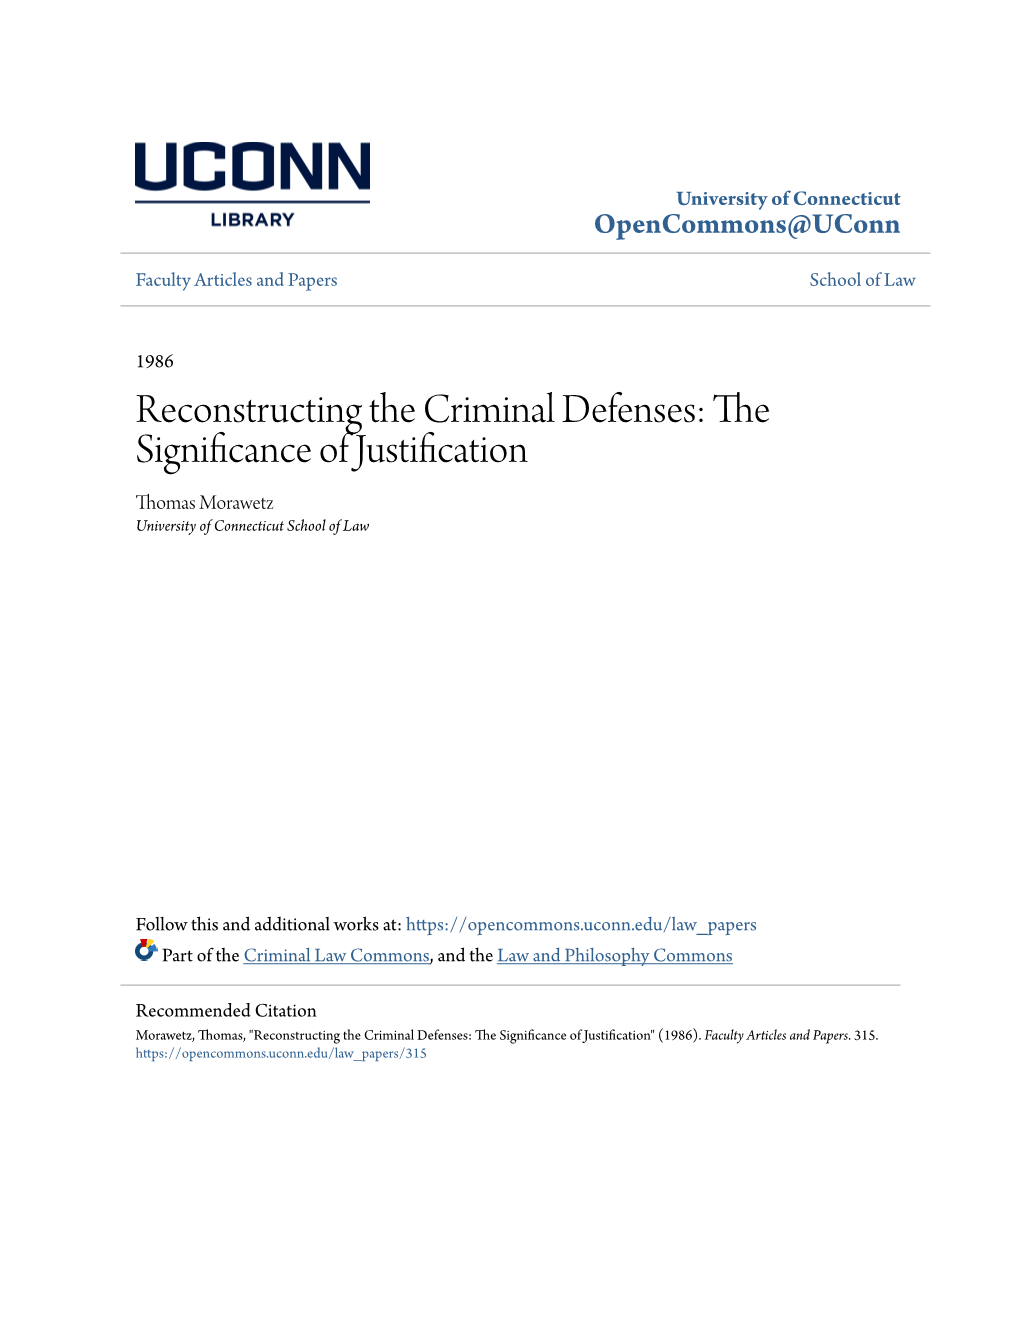 Reconstructing the Criminal Defenses: the Significance of Justification Thomas Morawetz University of Connecticut School of Law